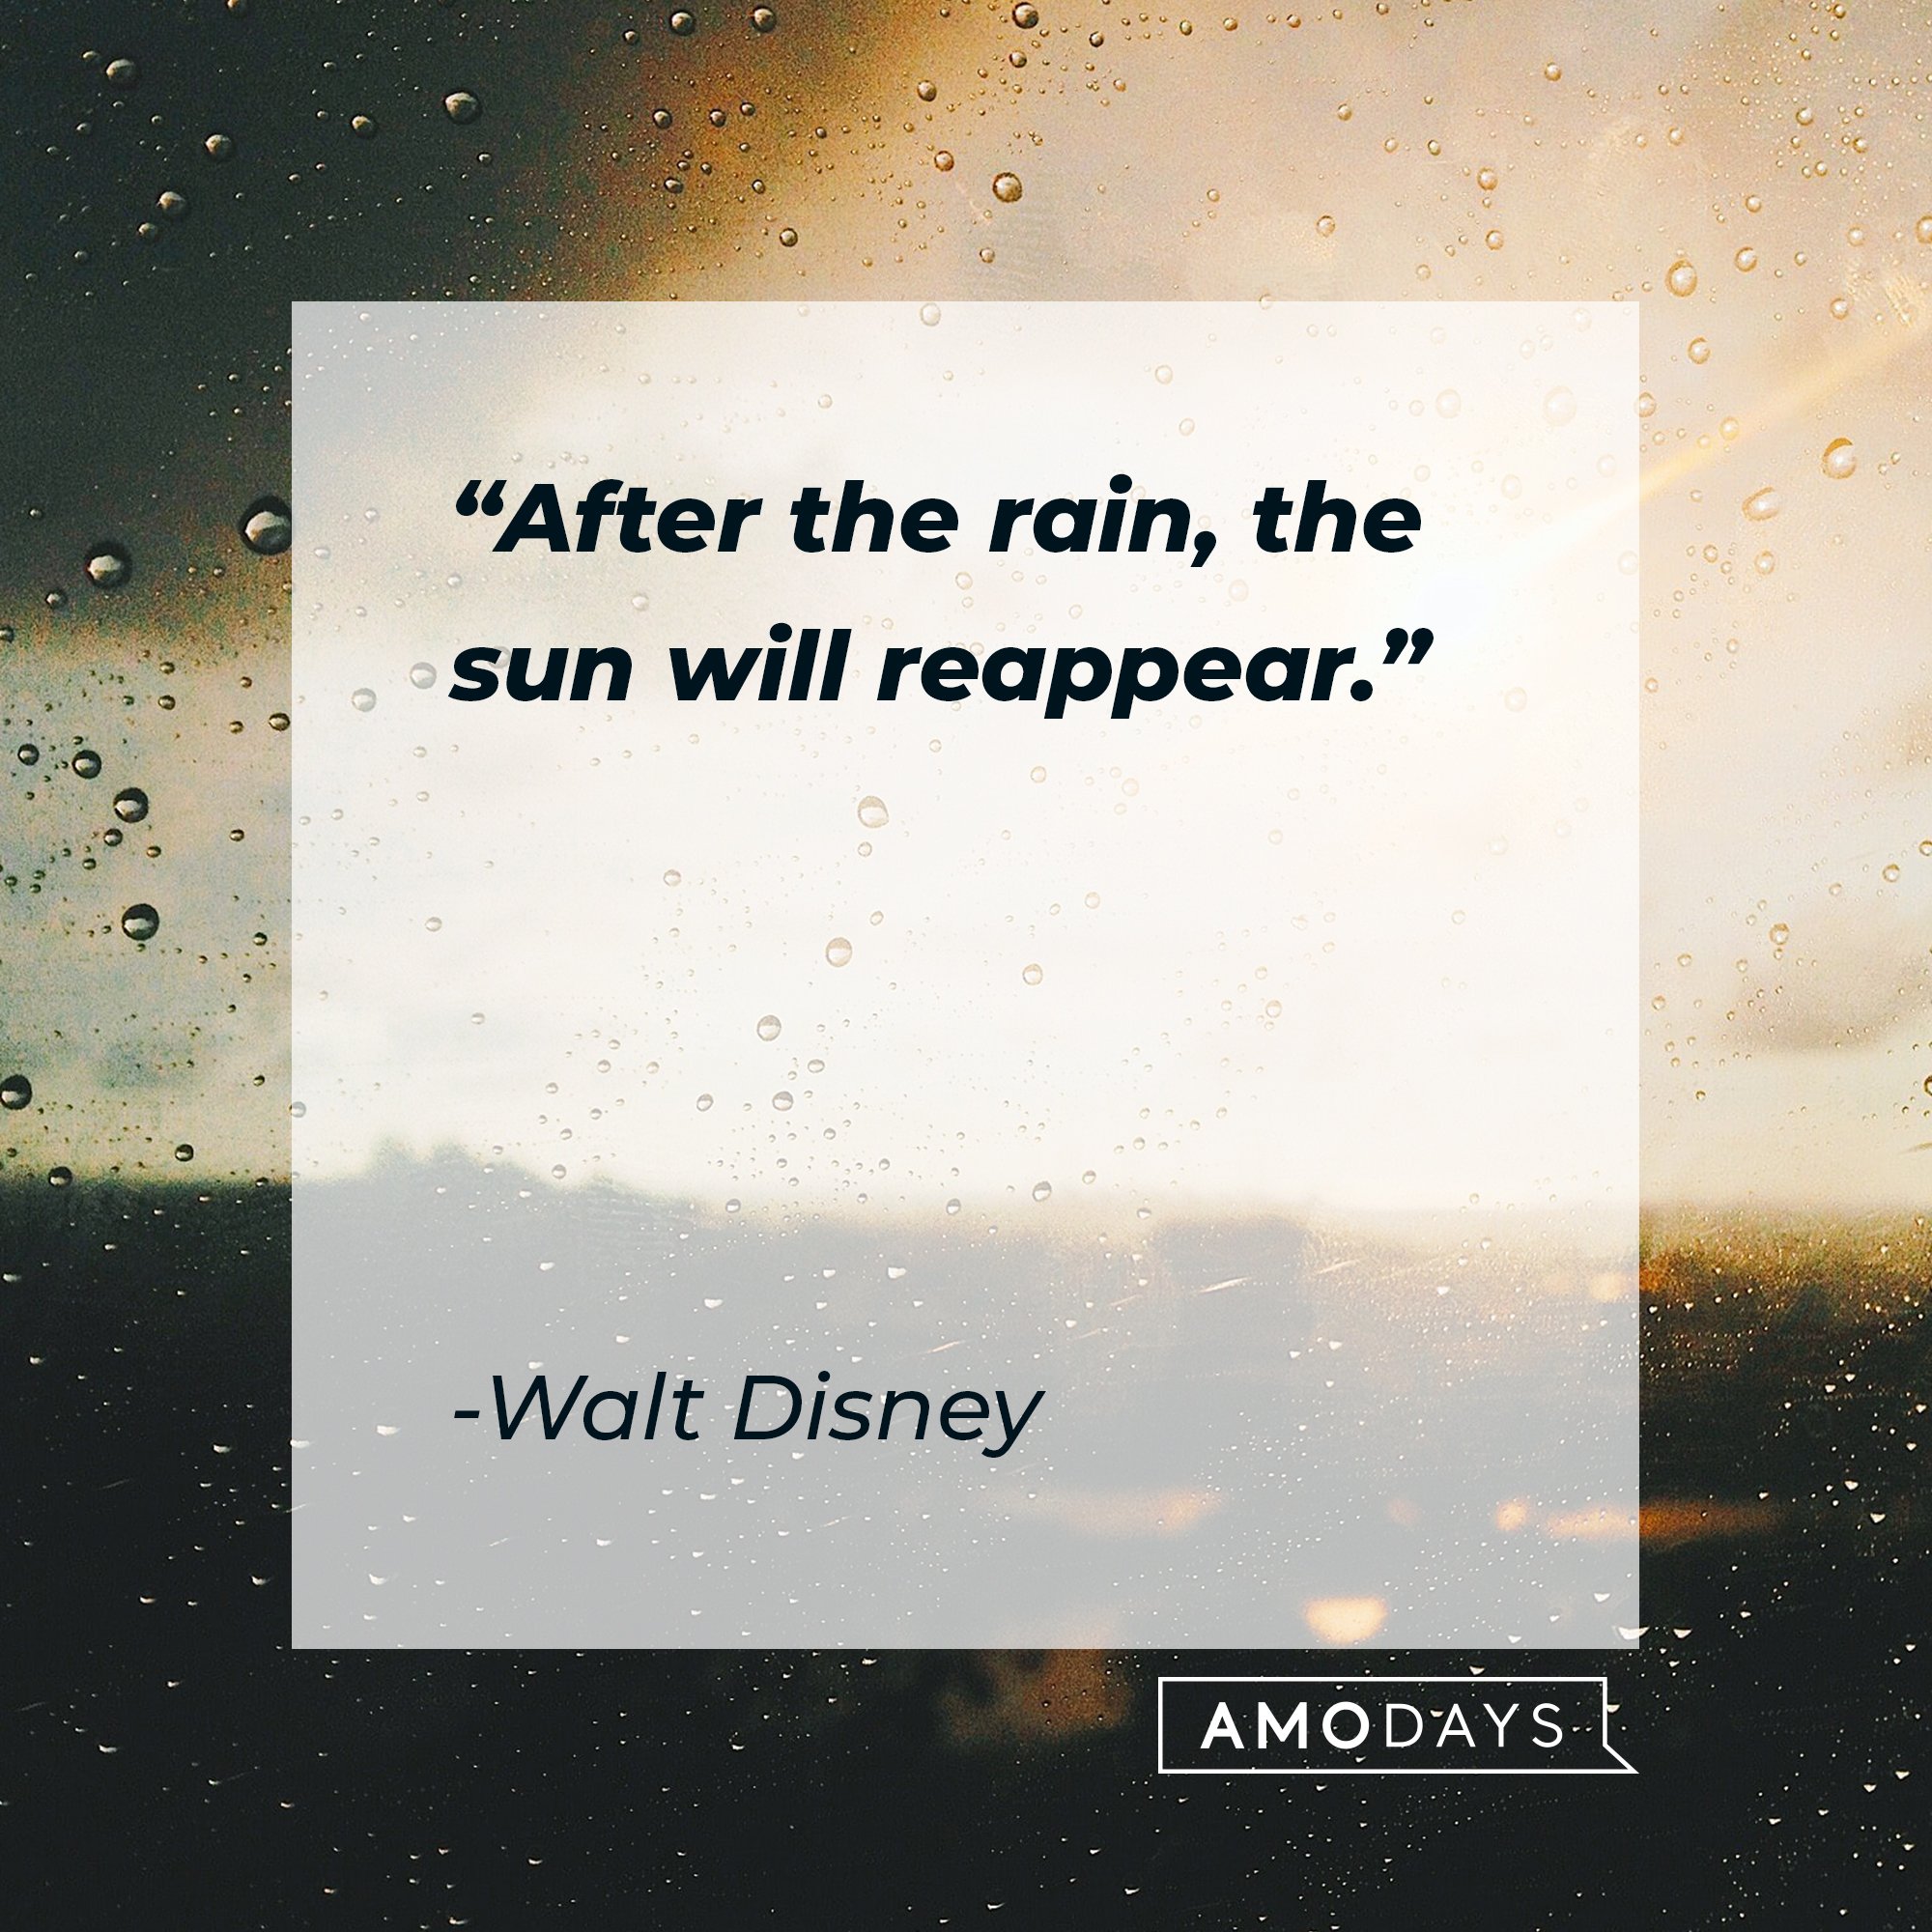 Walt Disney’s quote: "After the rain, the sun will reappear." | Image: AmoDays